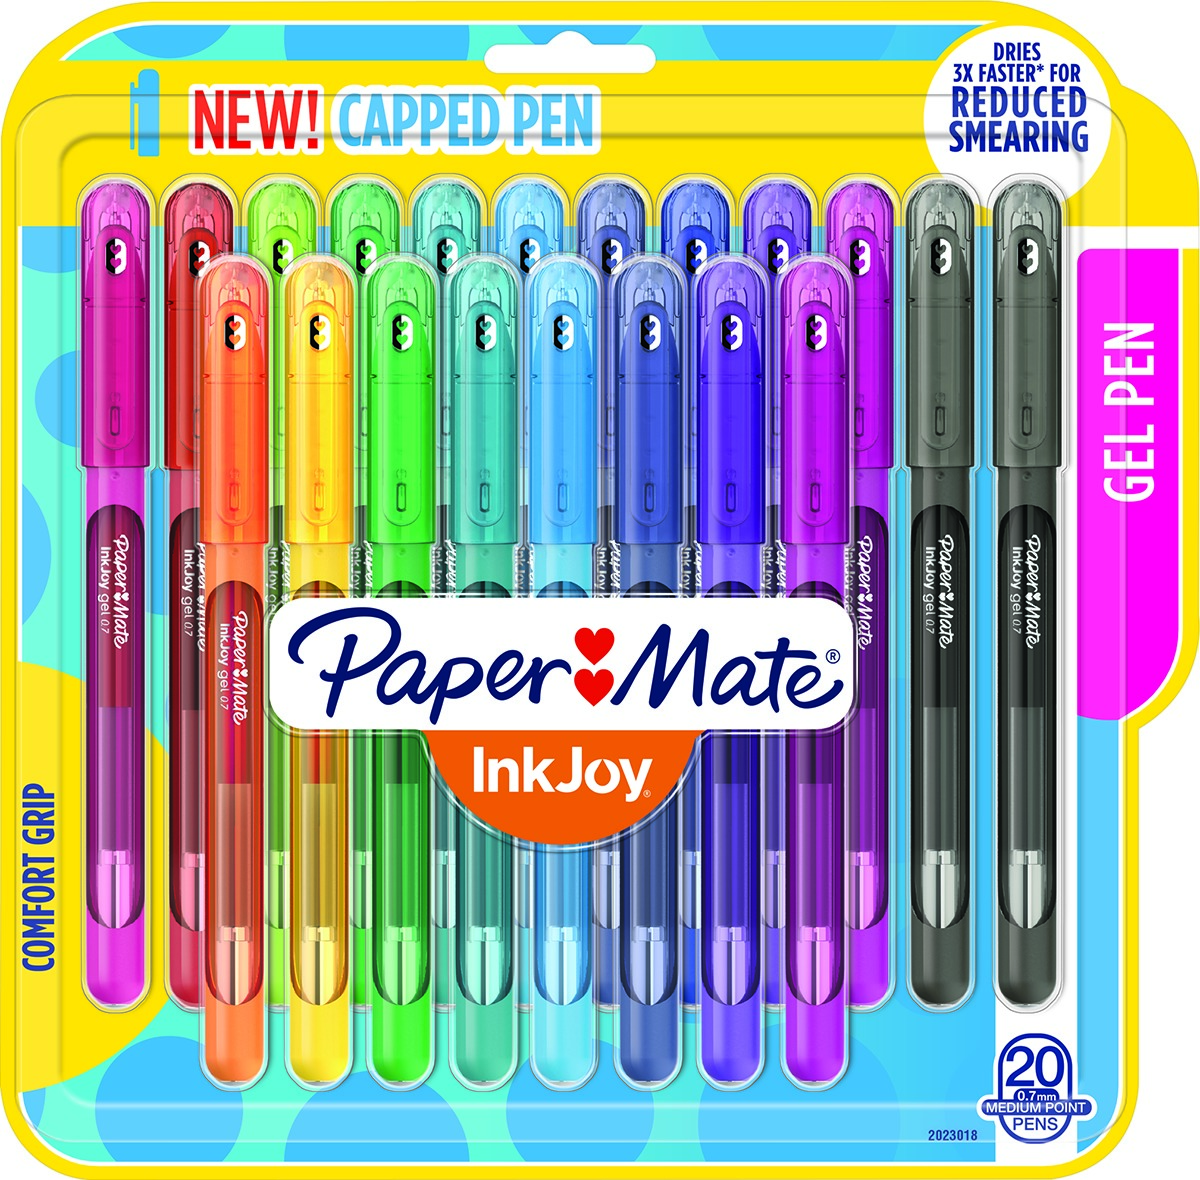 Paper Mate InkJoy Gel Pen REVIEW - MuffinChanel